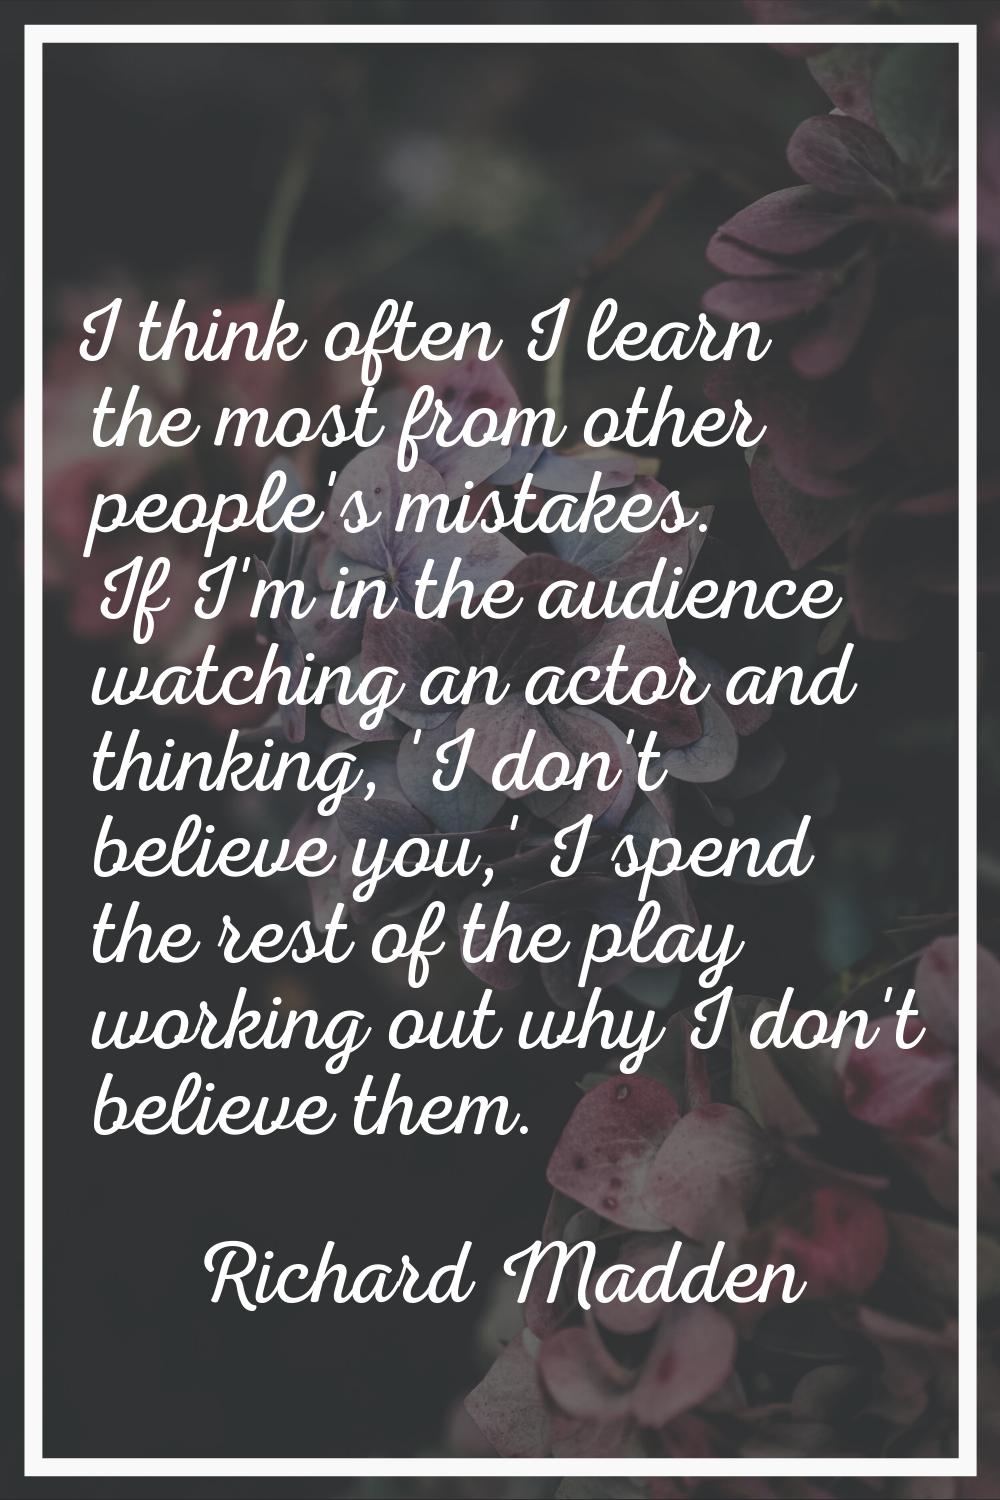 I think often I learn the most from other people's mistakes. If I'm in the audience watching an act